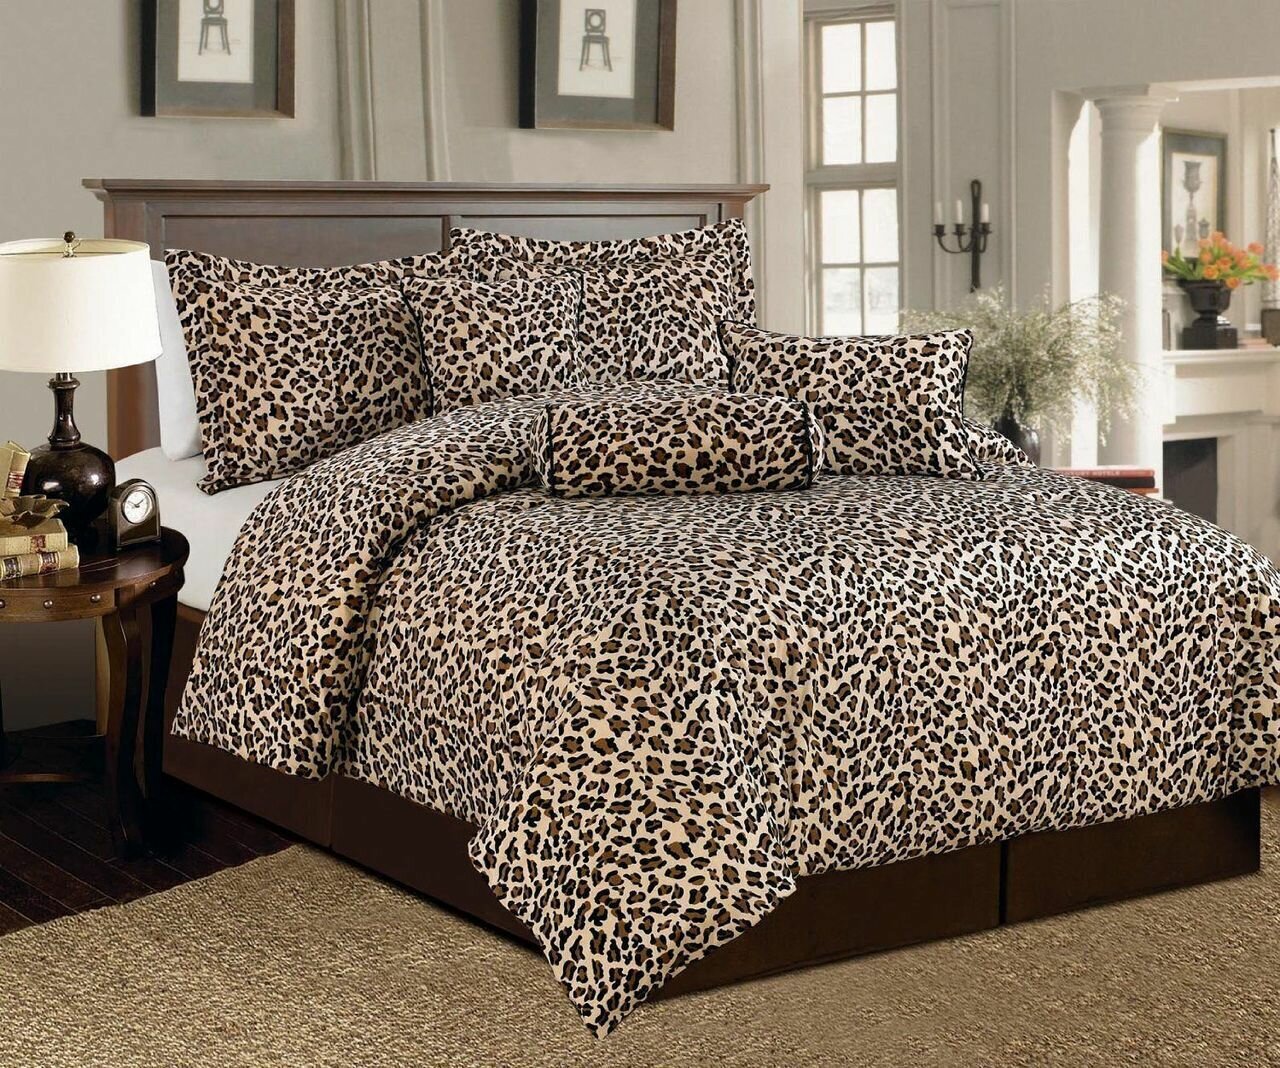 Leopard Ultra Soft and Light Blanket QUEEN Size Comforter Bedding Print Animal 